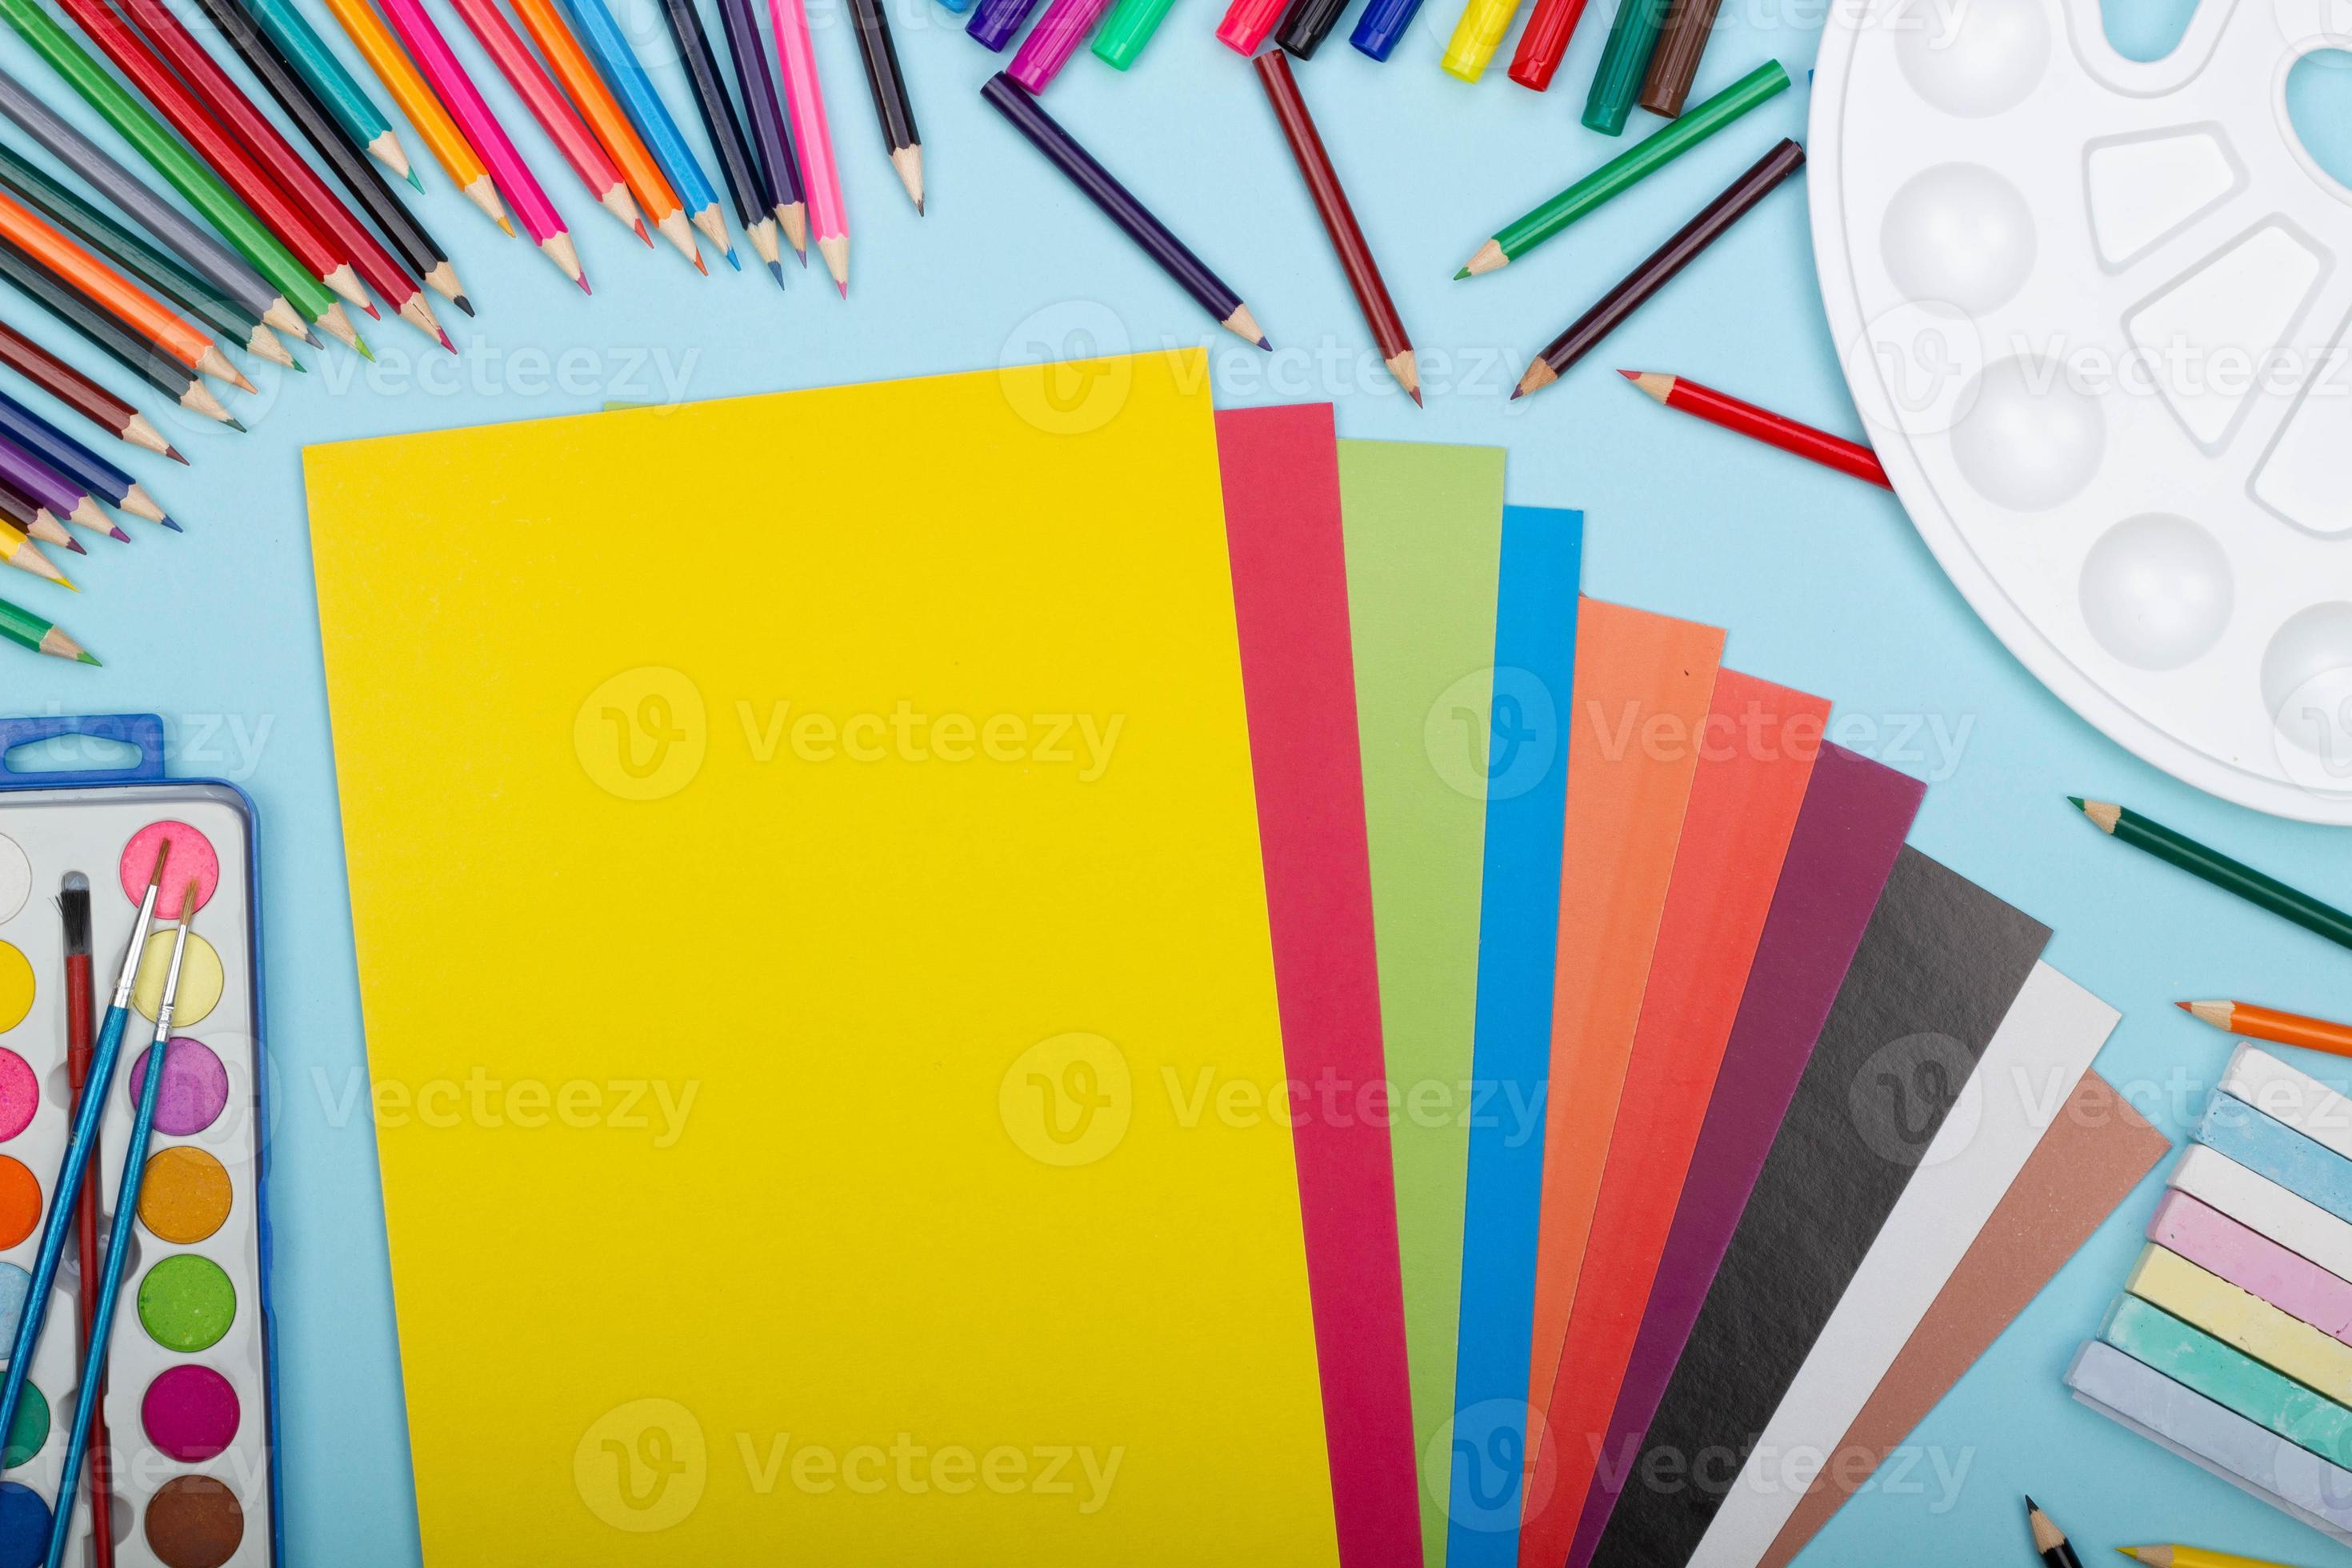 https://static.vecteezy.com/system/resources/previews/005/206/395/large_2x/art-school-supplies-for-painting-and-a-set-of-colored-paper-on-a-blue-background-with-copy-space-for-text-colorful-pencils-markers-paints-crayons-top-view-back-to-school-photo.jpg